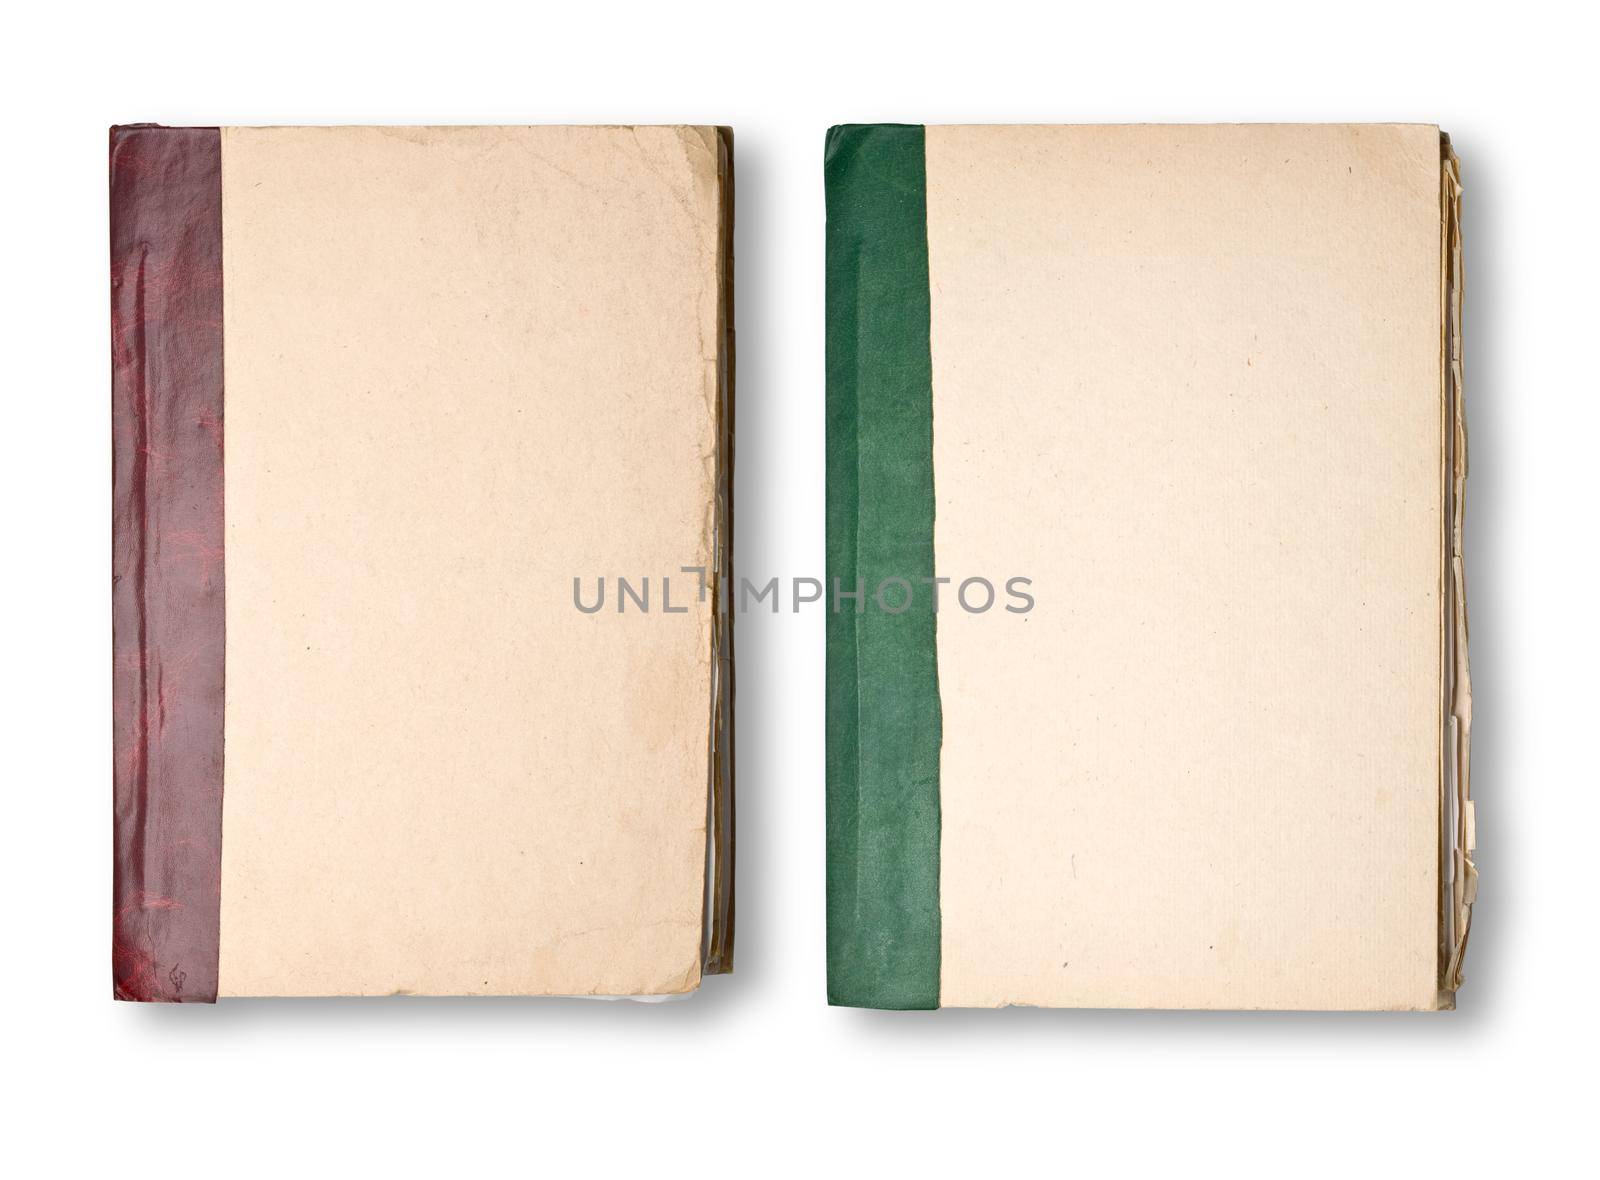 Two Old Book Cover isolatedd on white background